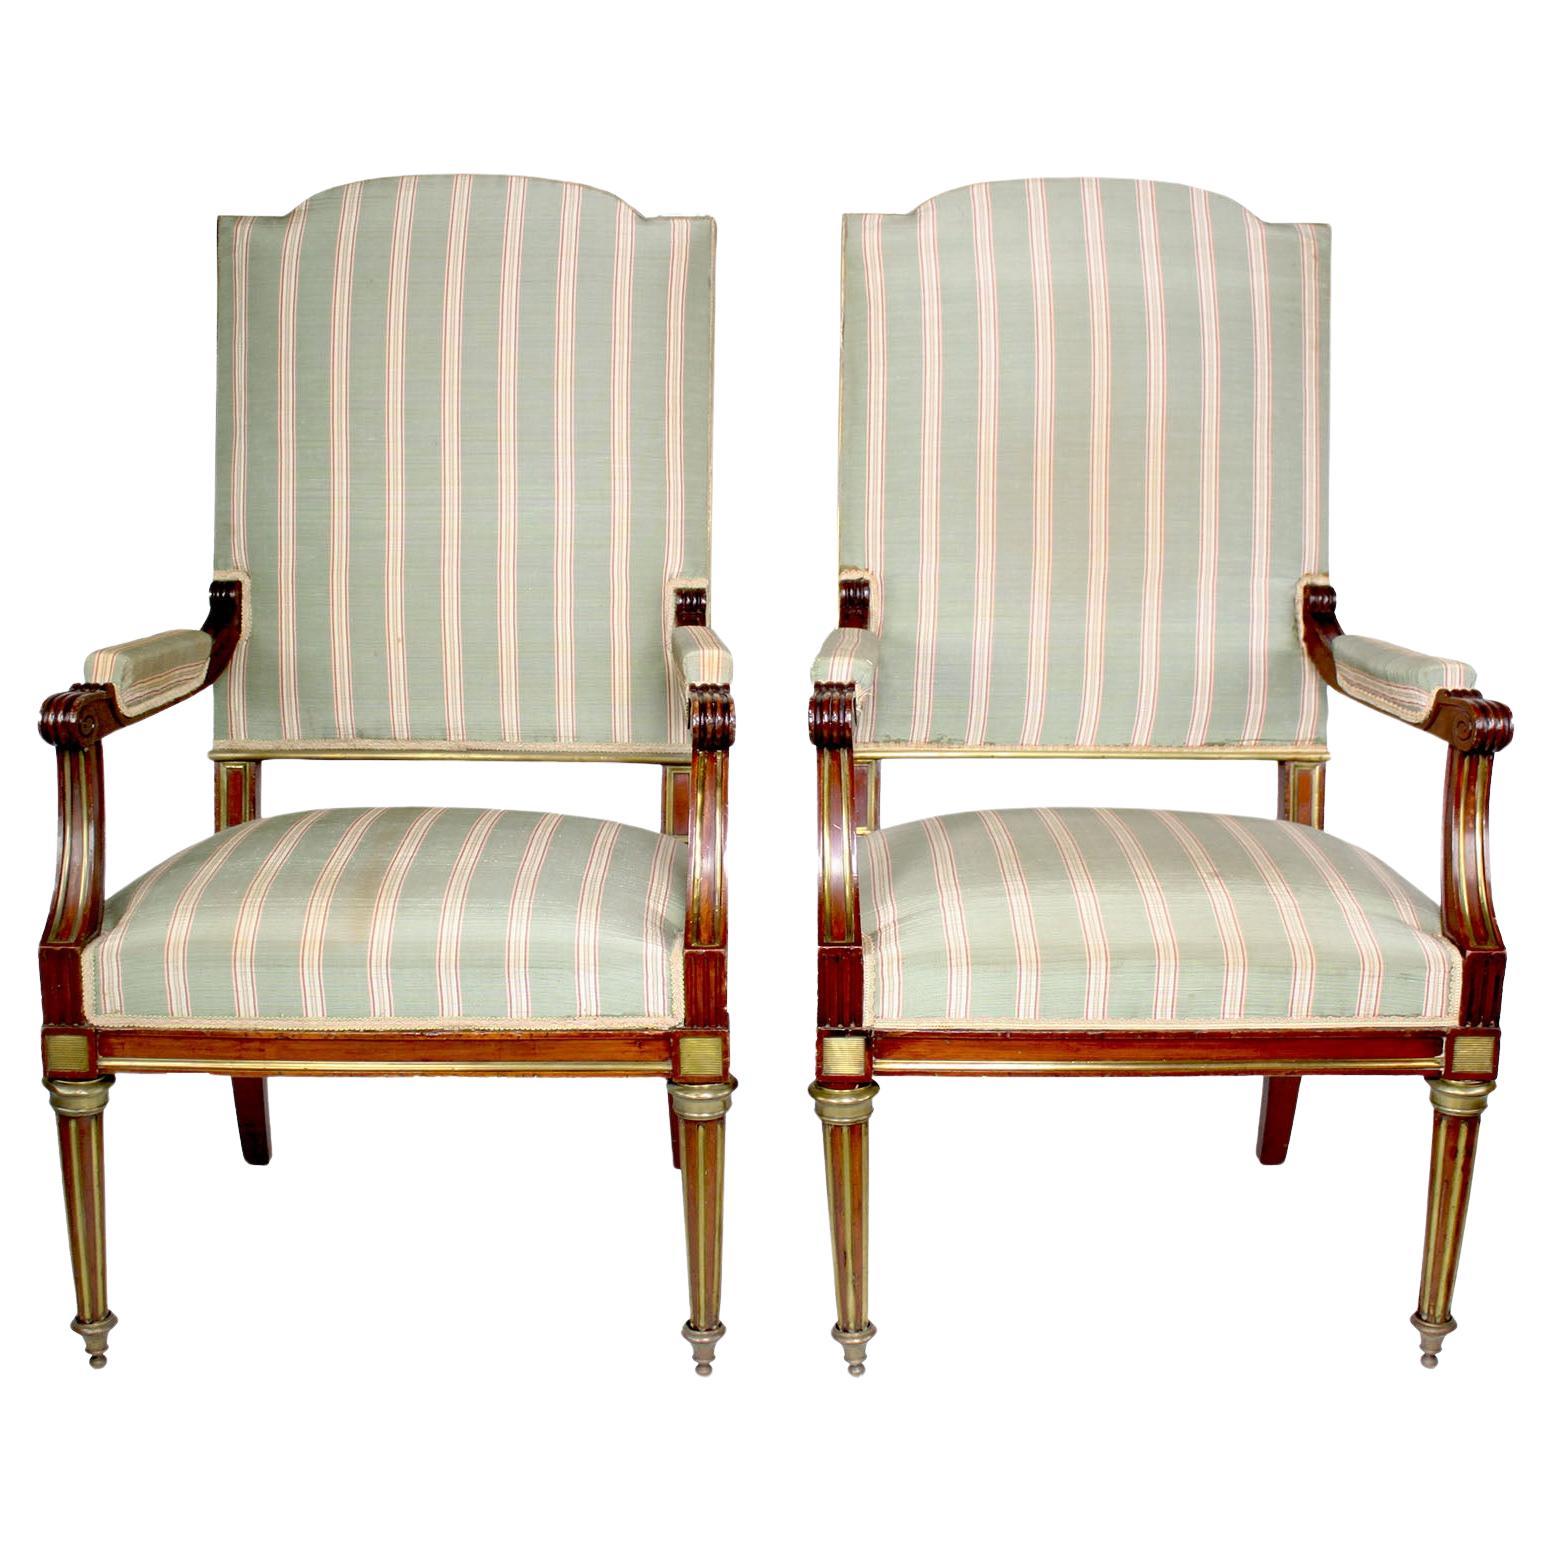 Pair French 19th-20th Century Louis XVI Style Mahogany and Gilt-Metal Armchairs For Sale